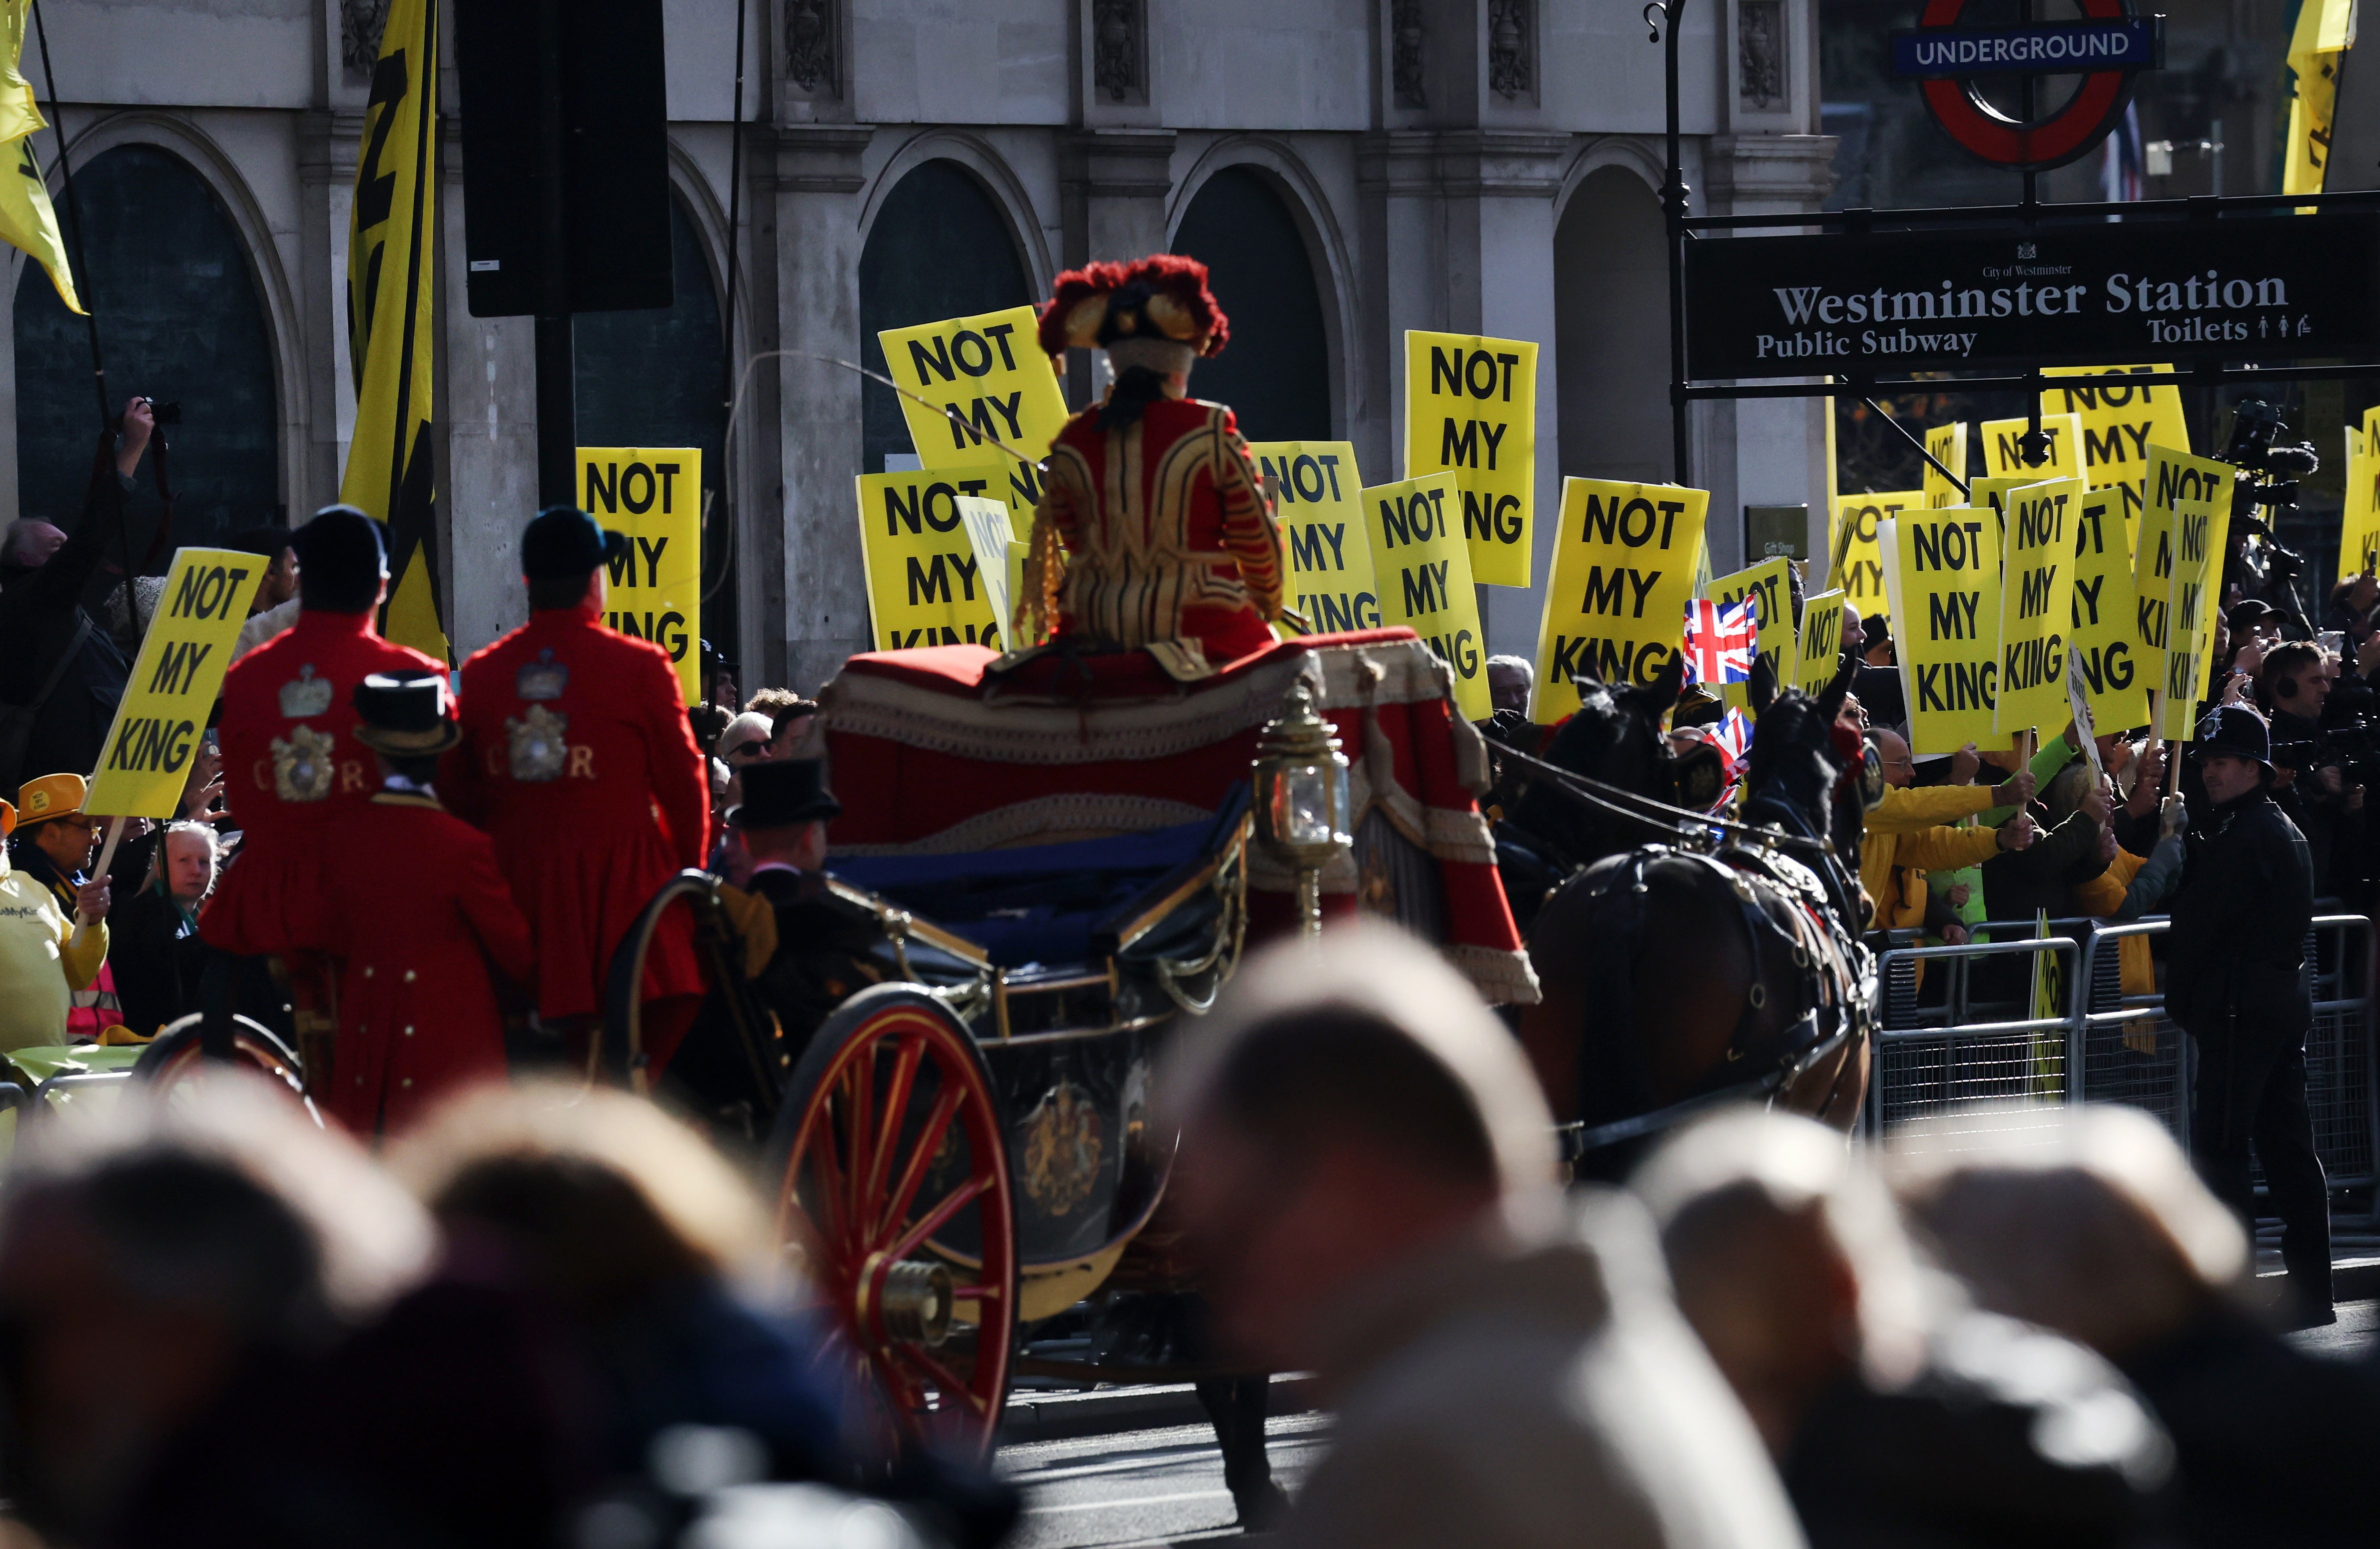 Anti-monarchy protesters demonstrated at the State Opening of Parliament